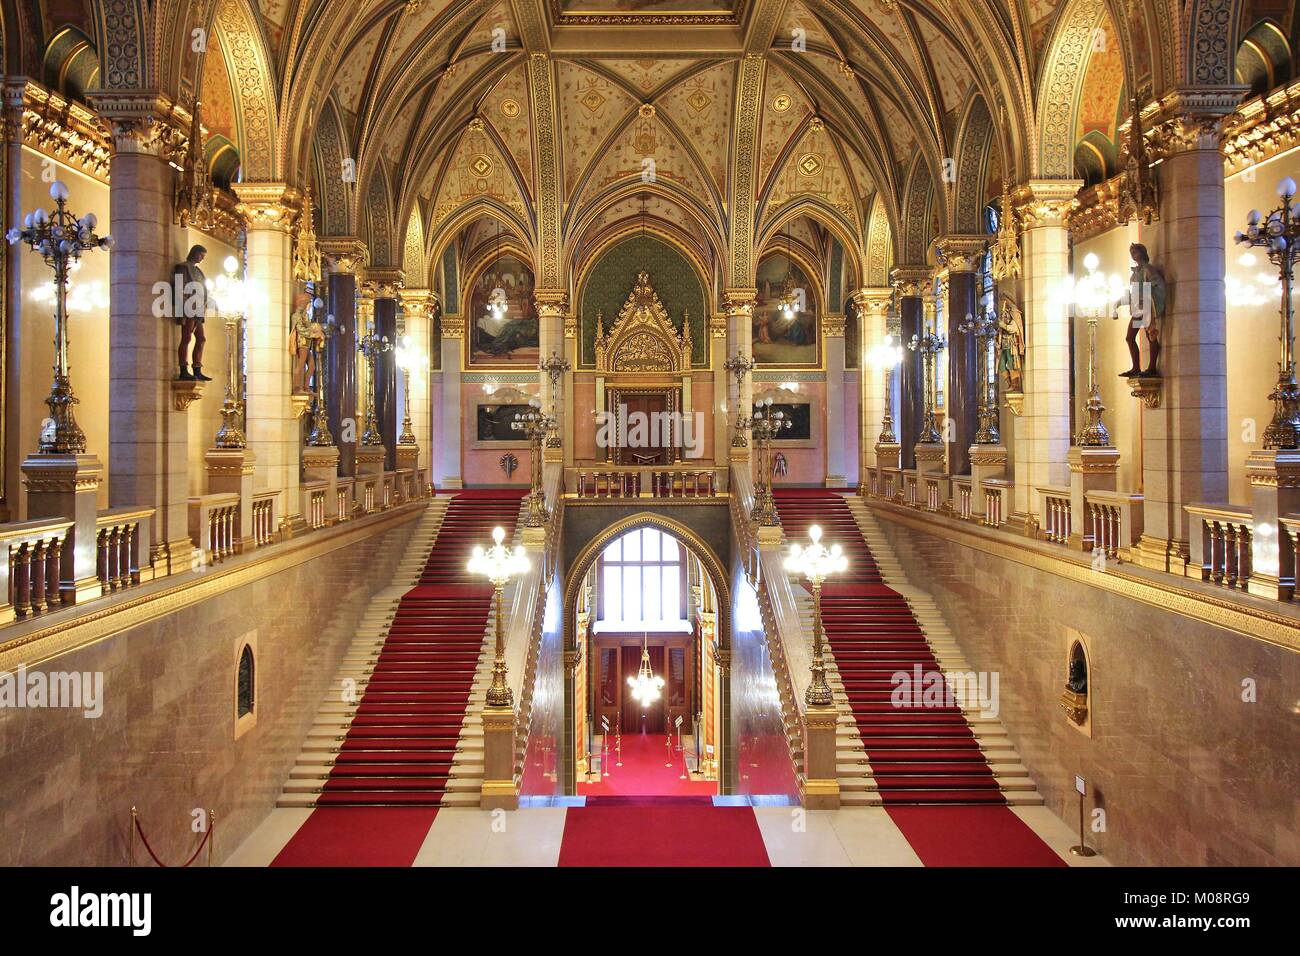 BUDAPEST, HUNGARY - JUNE 19, 2014: Interior view of Parliament Building in Budapest. The building was completed in 1905 and is in Gothic Revival style Stock Photo